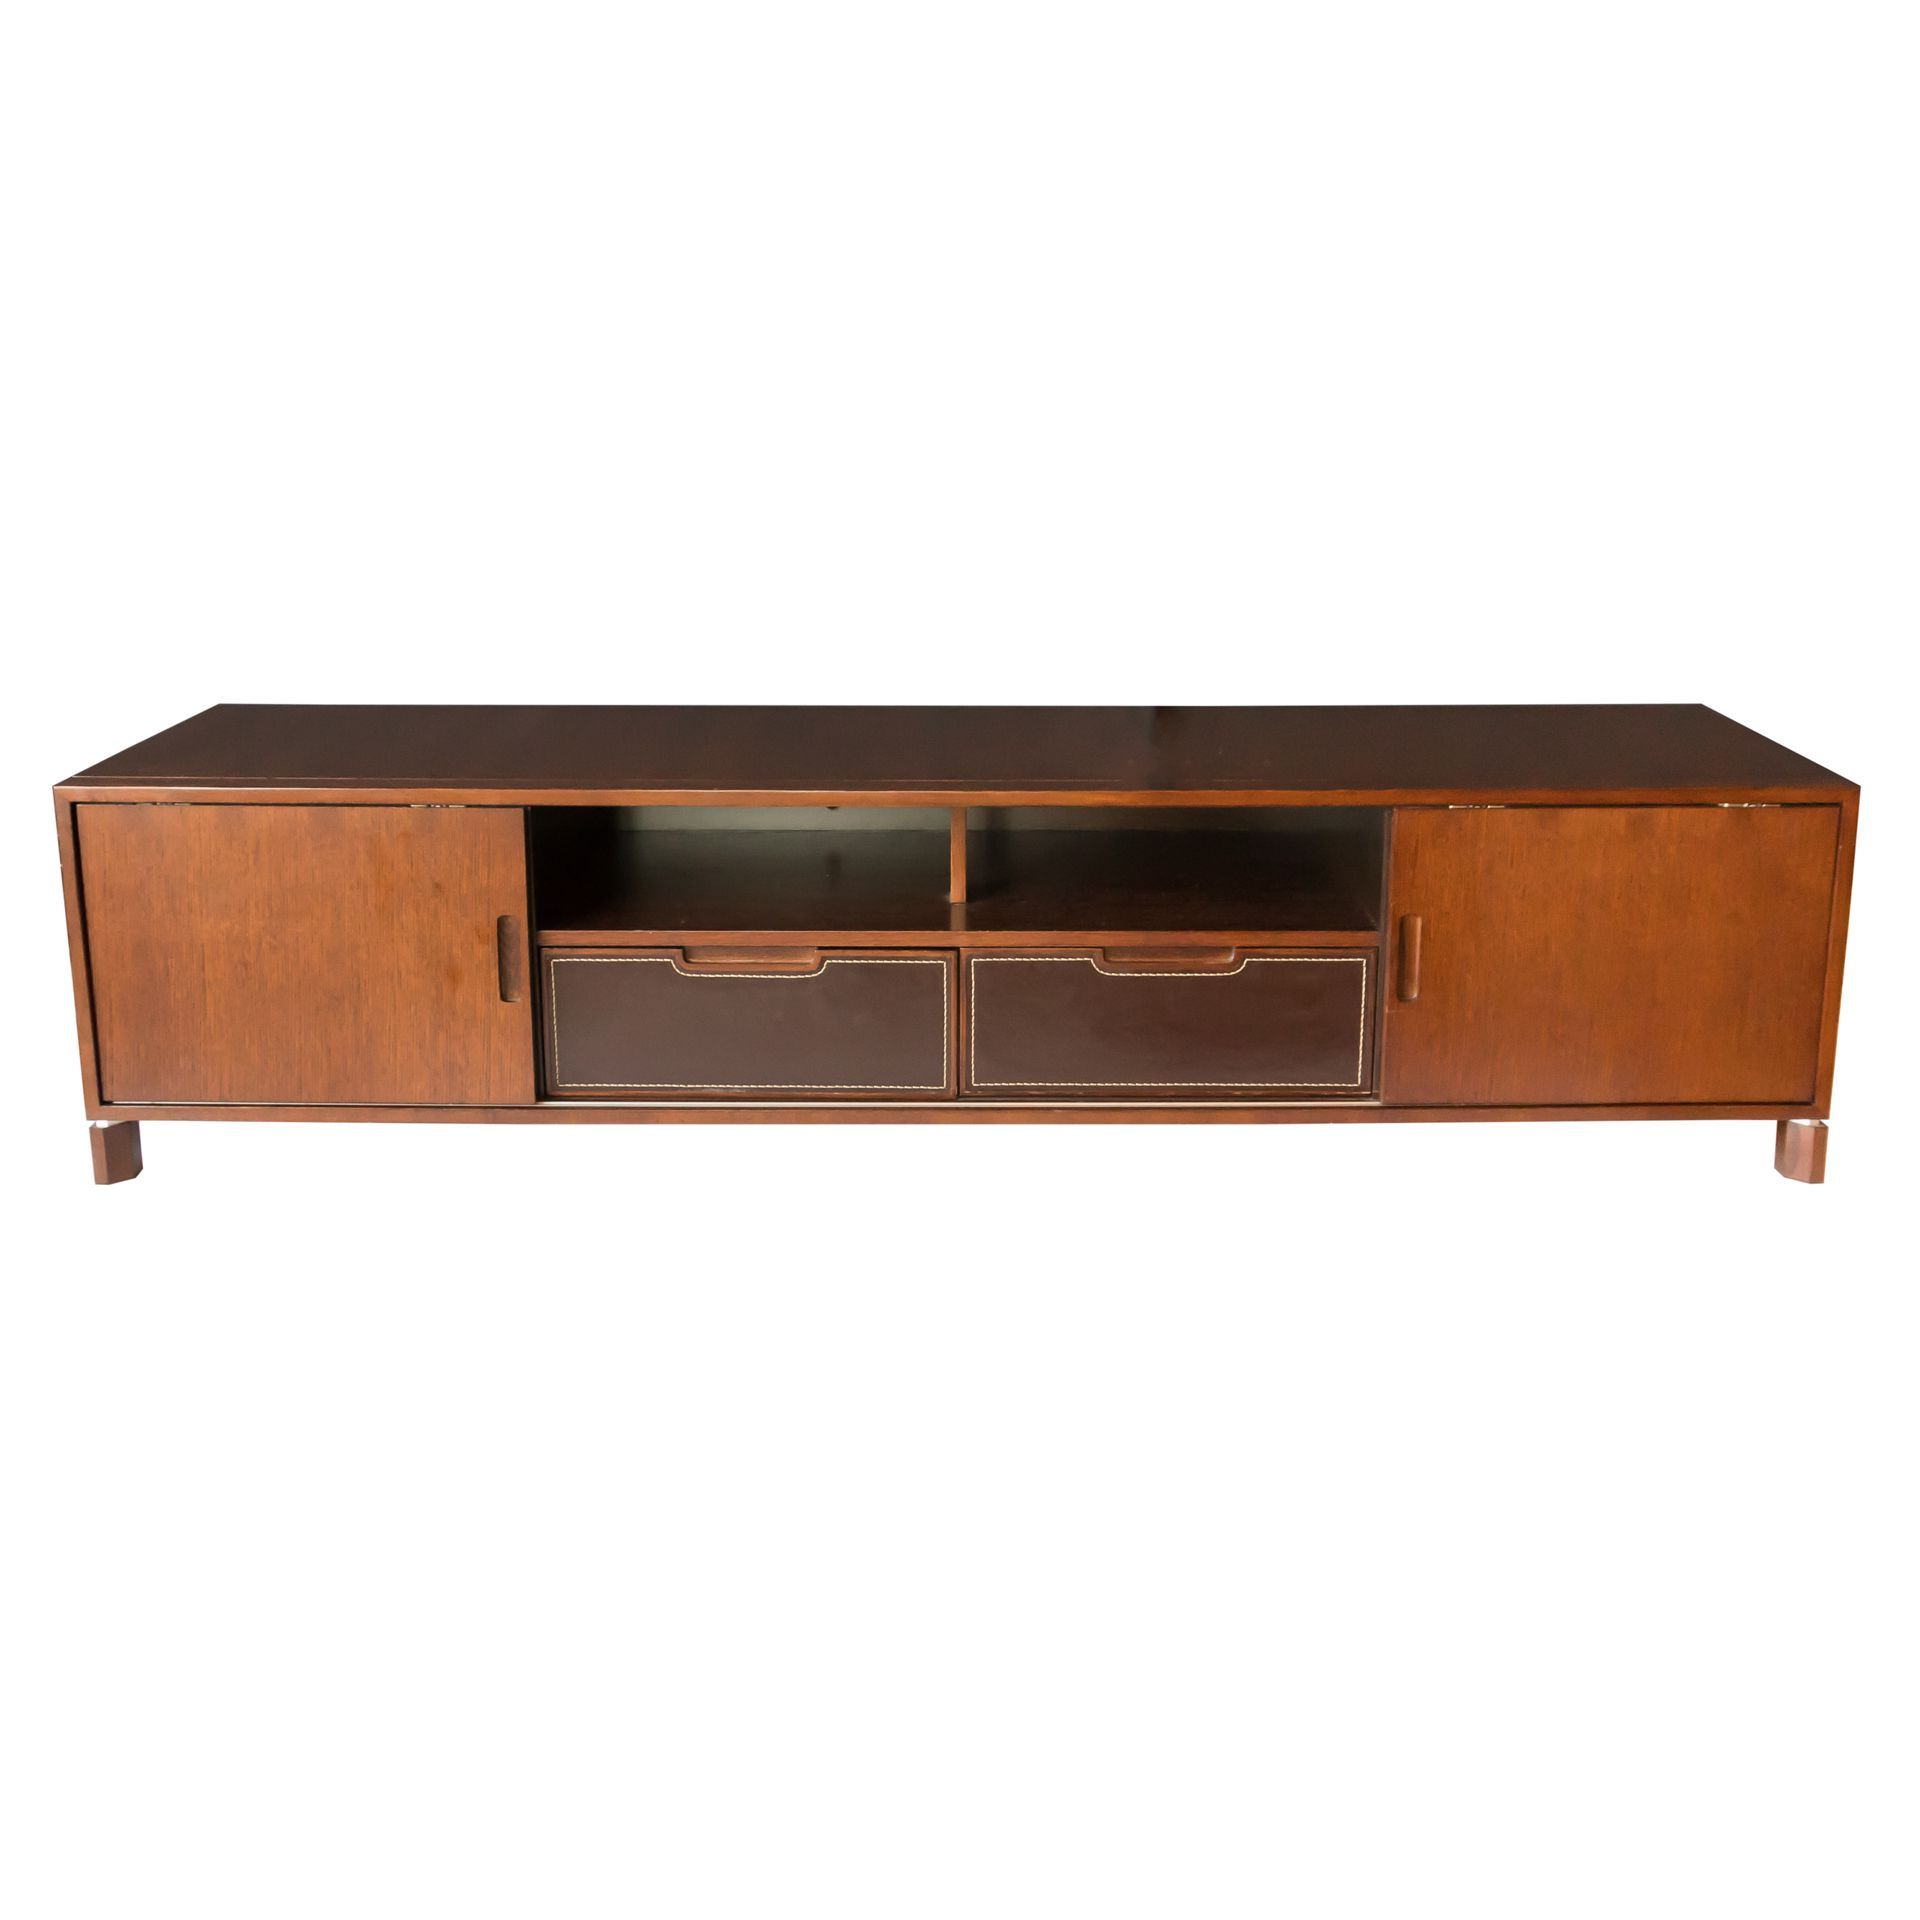 Low Profile Media Console Has A Dark Finish With Two For Dark Brown Tv Cabinets With 2 Sliding Doors And Drawer (View 15 of 20)